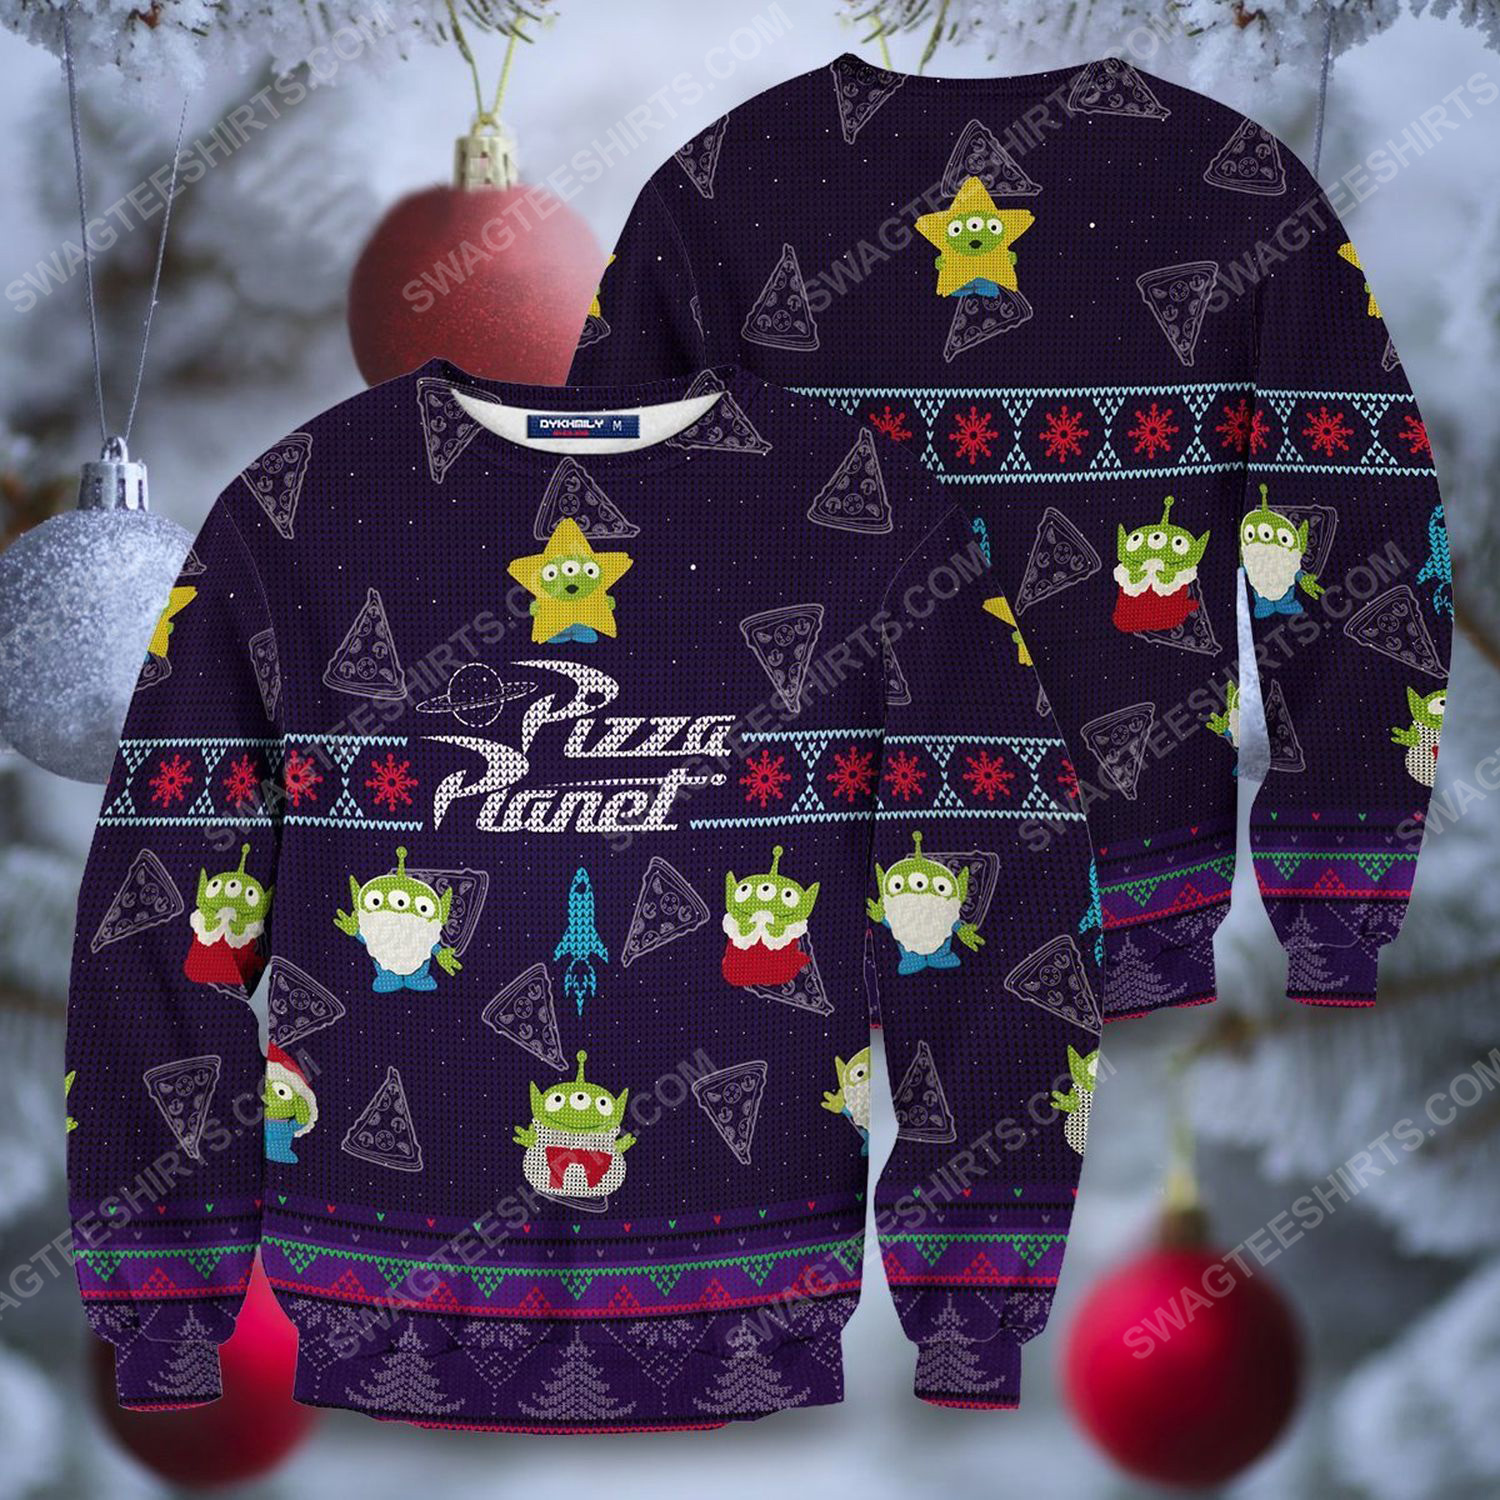 [special edition] Pizza planet full print ugly christmas sweater – maria